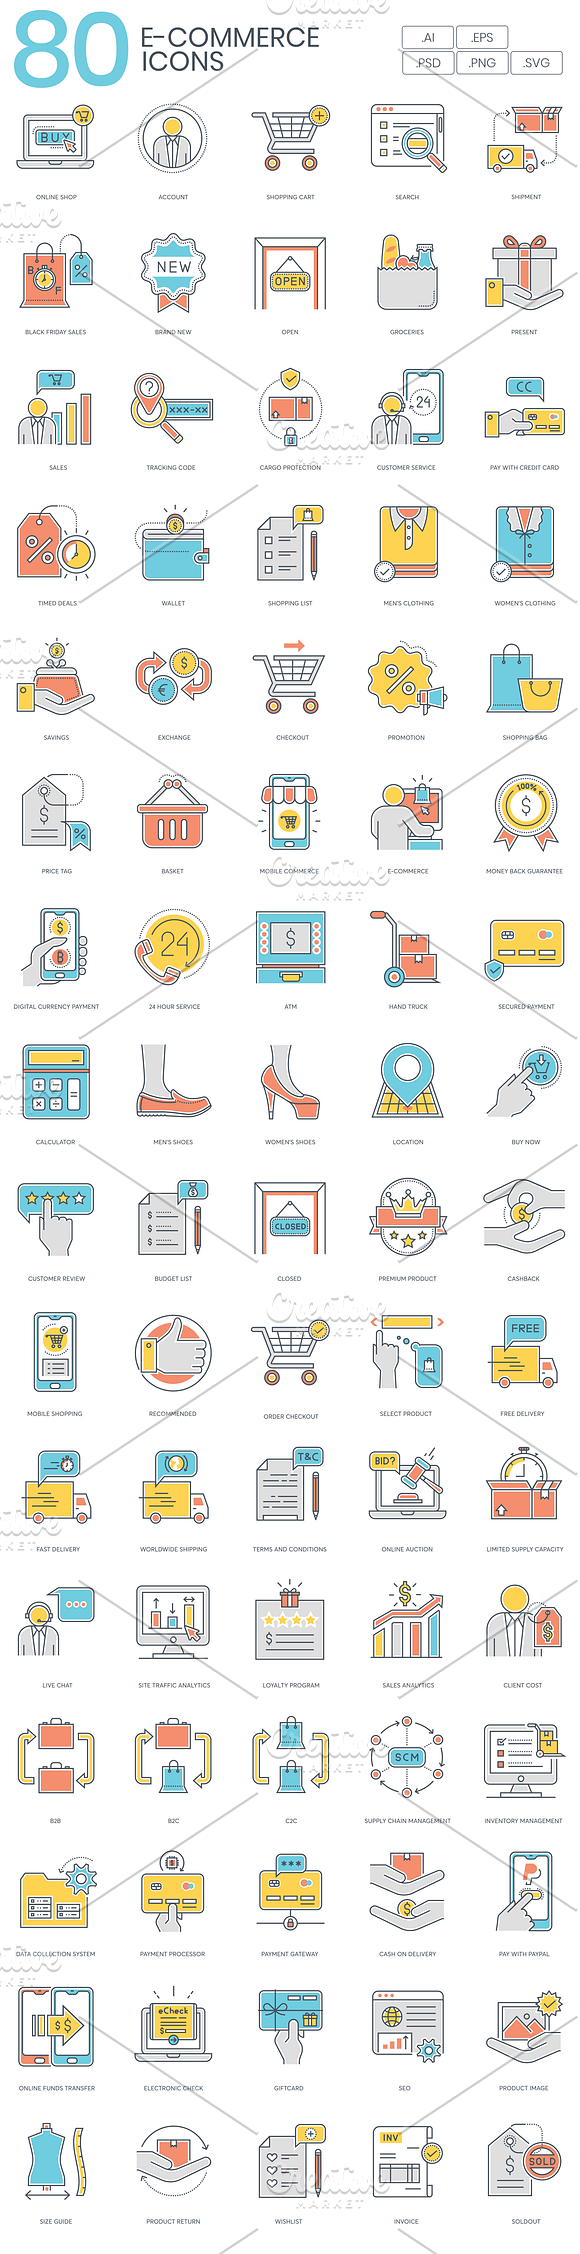 800+ Startup Icons Bundle in Contact Icons - product preview 5